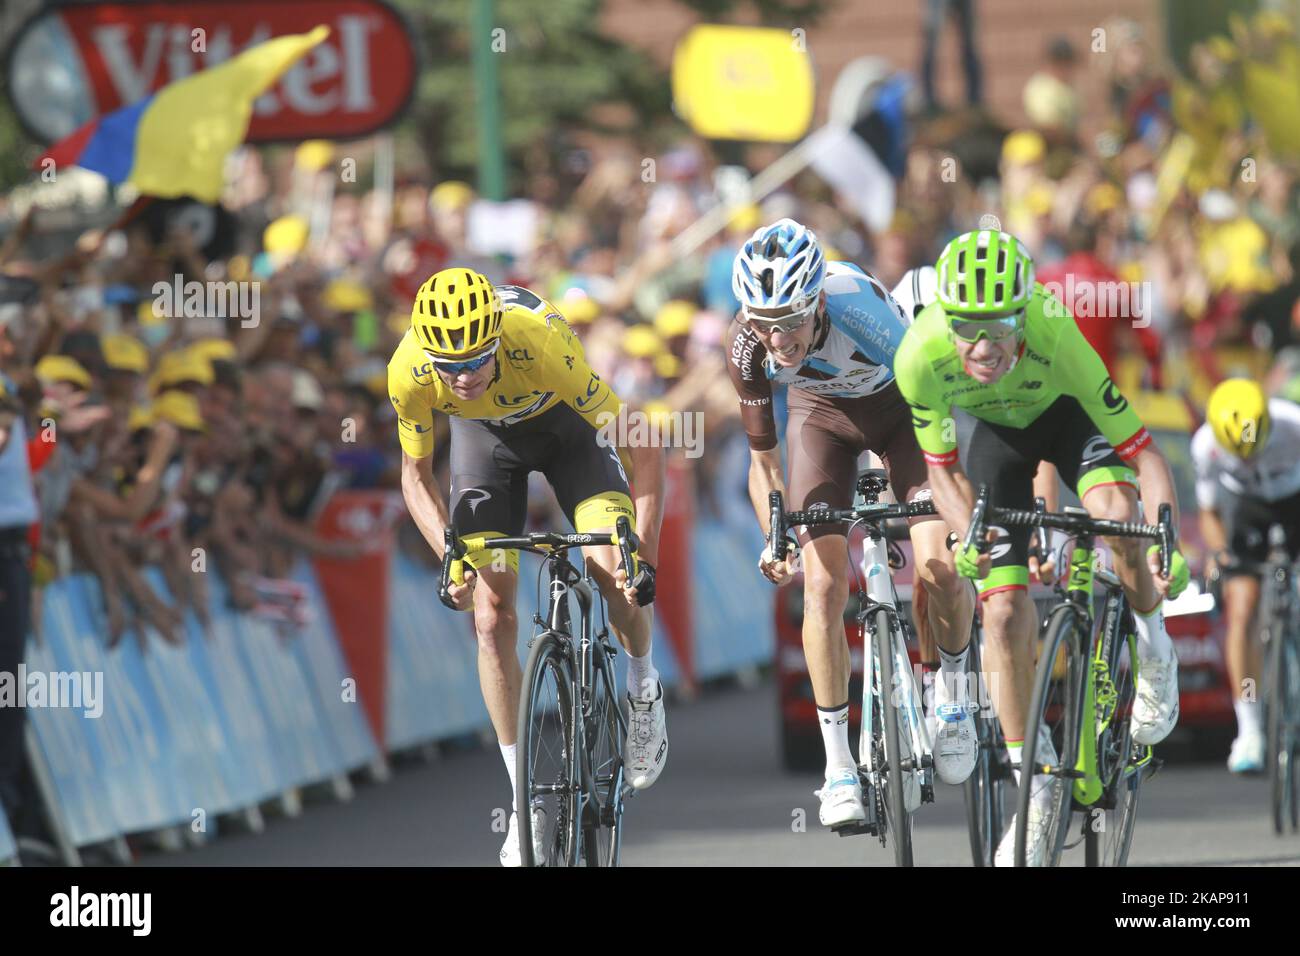 (From L) Great Britain's Christopher Froome wearing the overall leader's yellow jersey, France's Romain Bardet and Colombia's Rigoberto Uran ride towards the finish line during the 183 km seventeenth stage of the 104th edition of the Tour de France cycling race on July 19, 2017 between Le La Mure and Serre-Chevalier, French Alps. (Photo by Elyxandro Cegarra/NurPhoto) *** Please Use Credit from Credit Field *** Stock Photo